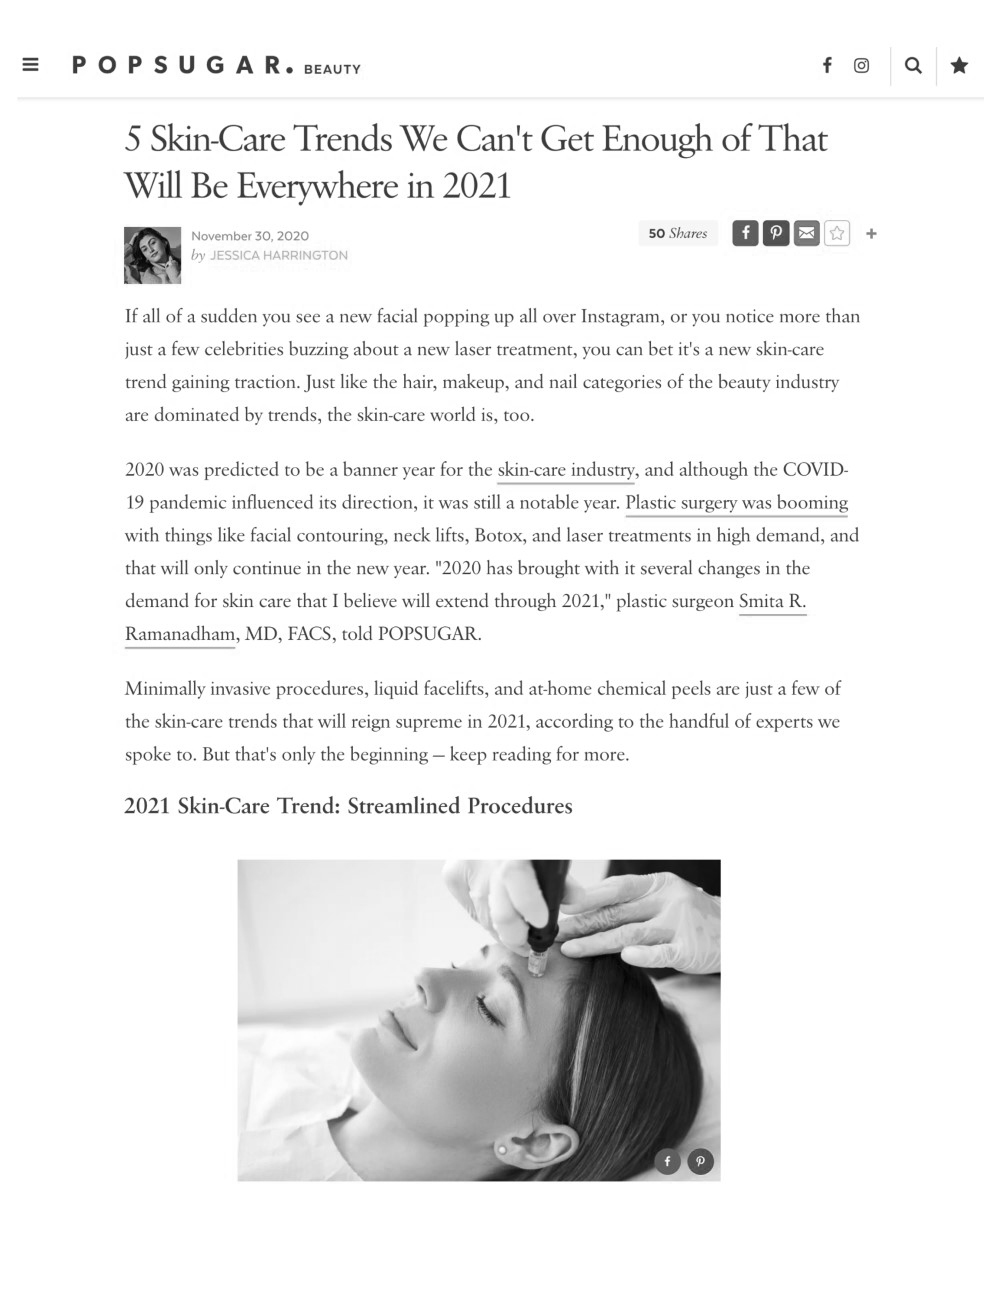 POPSUGAR featured The Pro-Aging Playbook by Dr. Paul Jarrod Frank of PFrankMD